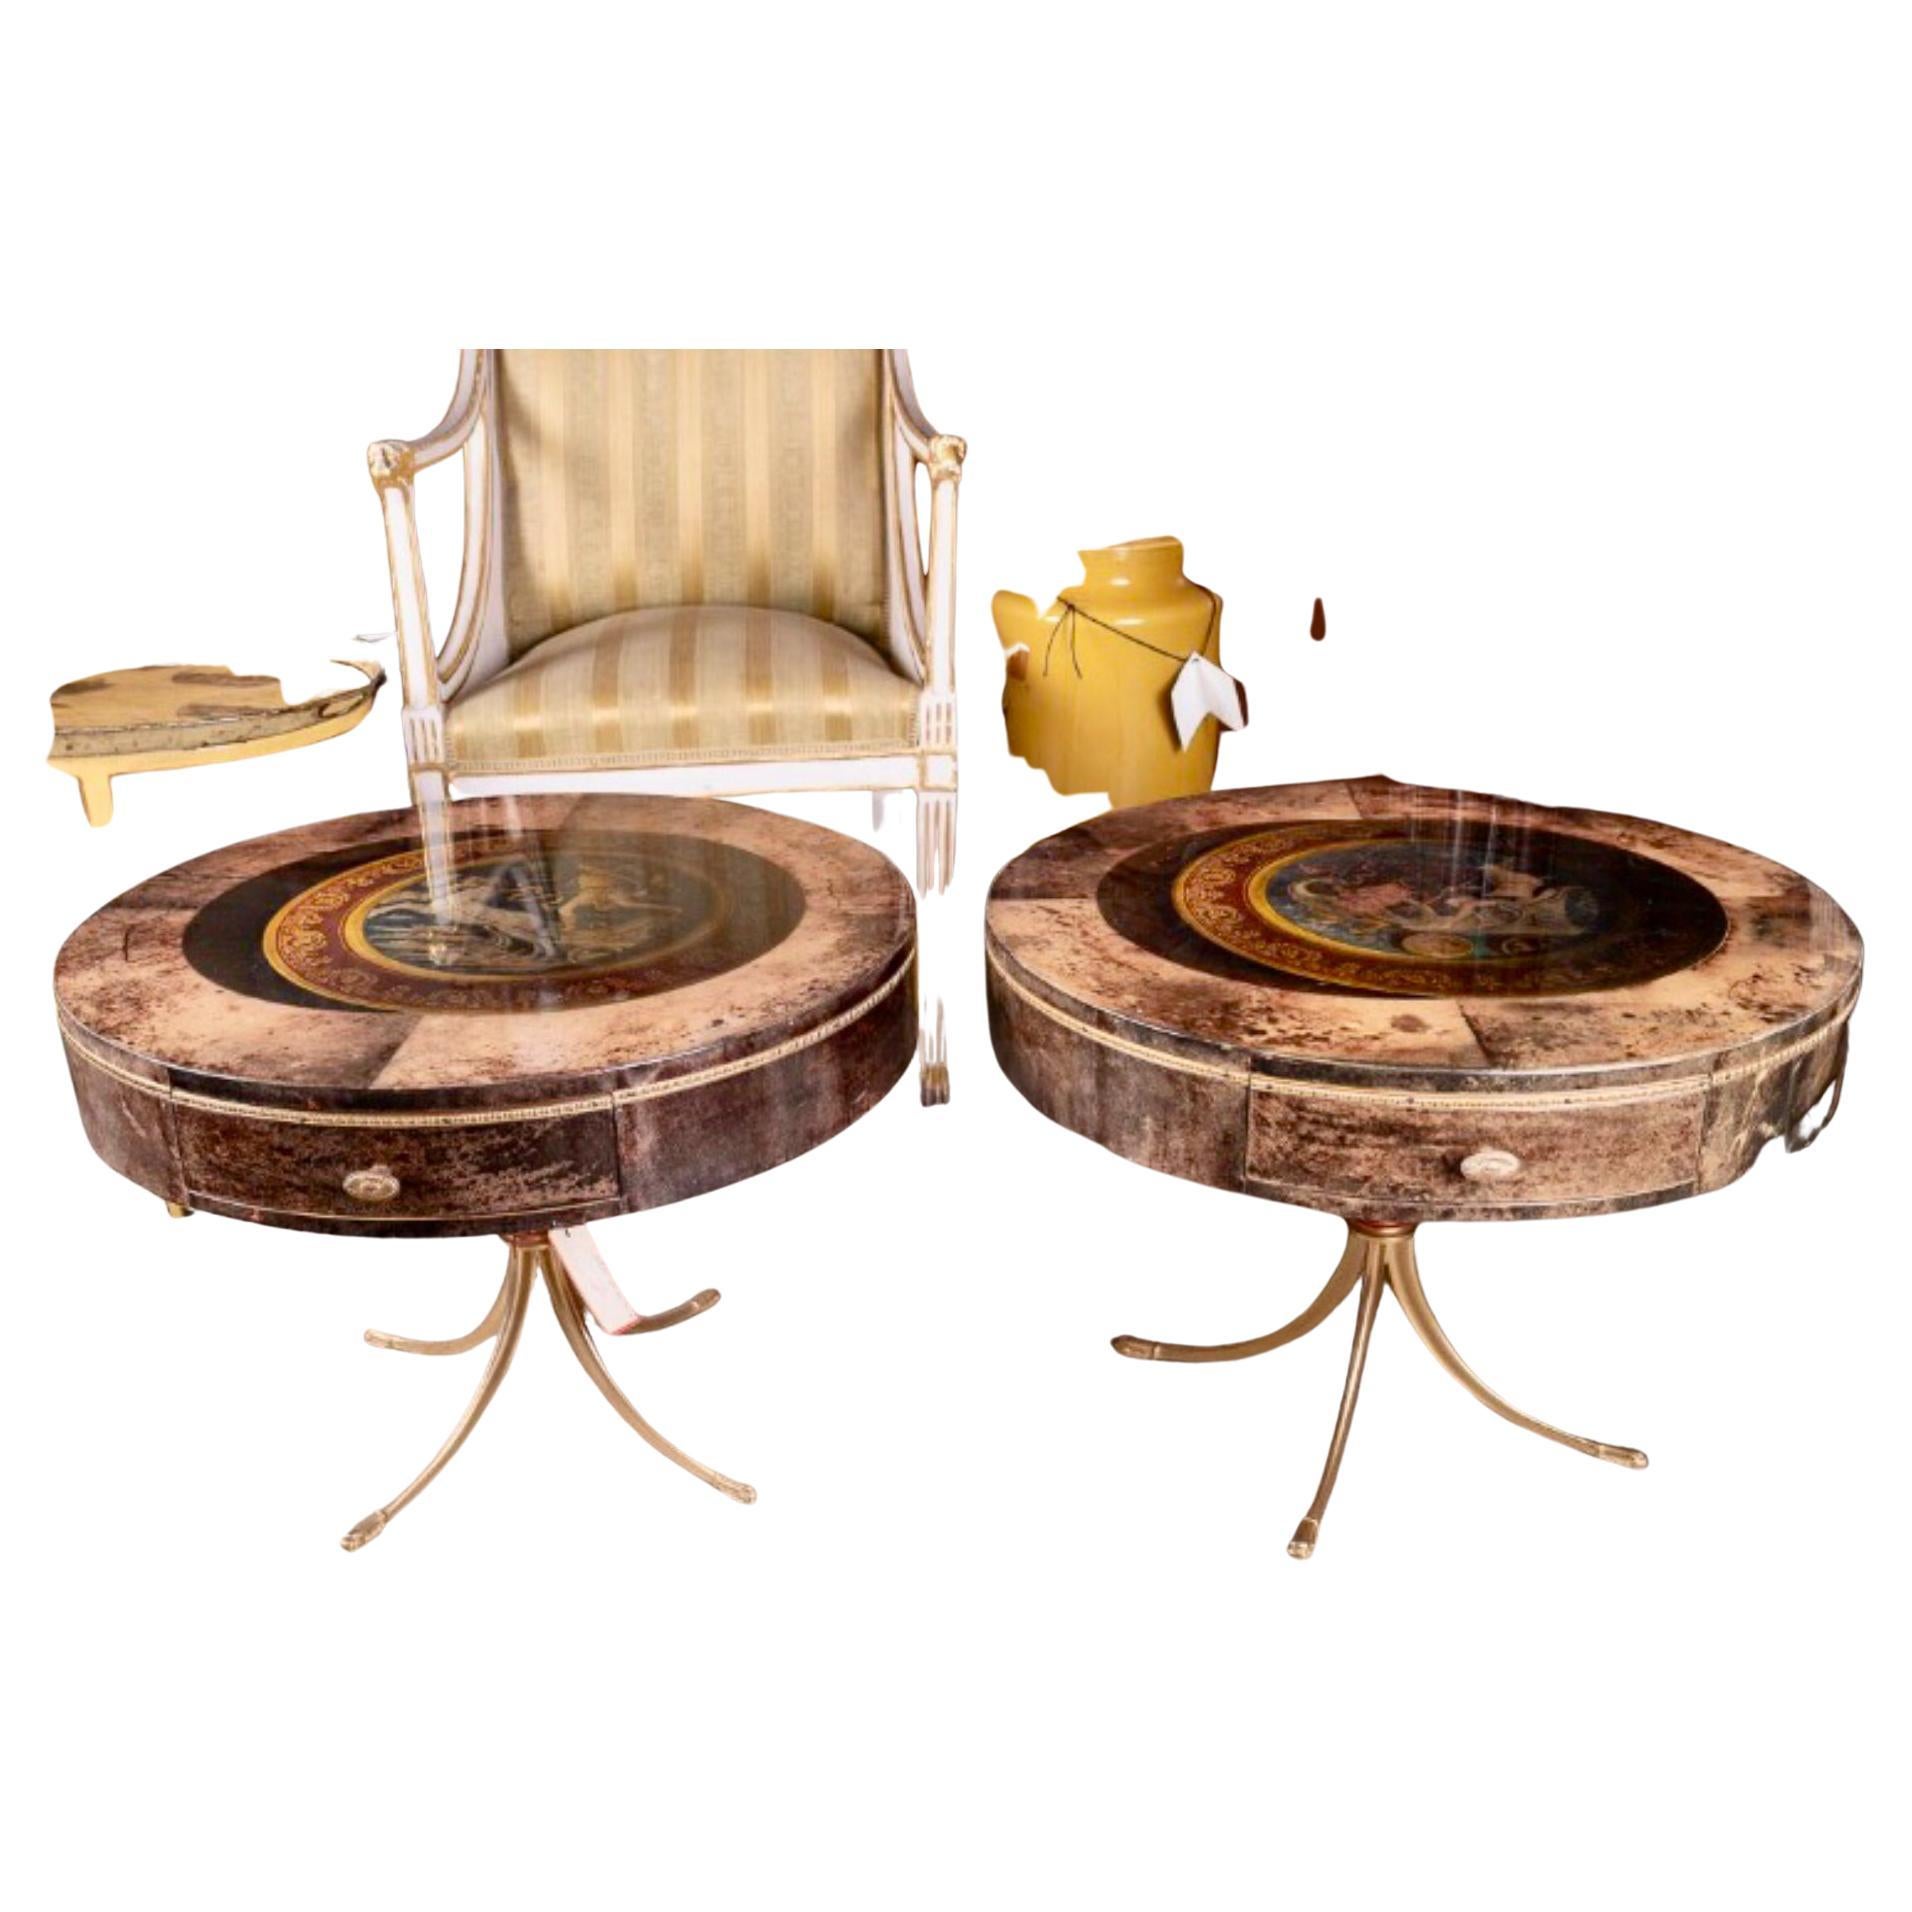 Having sold many pieces by Aldo Tura that were simply beautiful,these two tables are quite a departure from his work. The Neoclassical Paintings are an exceptional addition to the beauty of these tables!The artwork contains images of chariots,sea